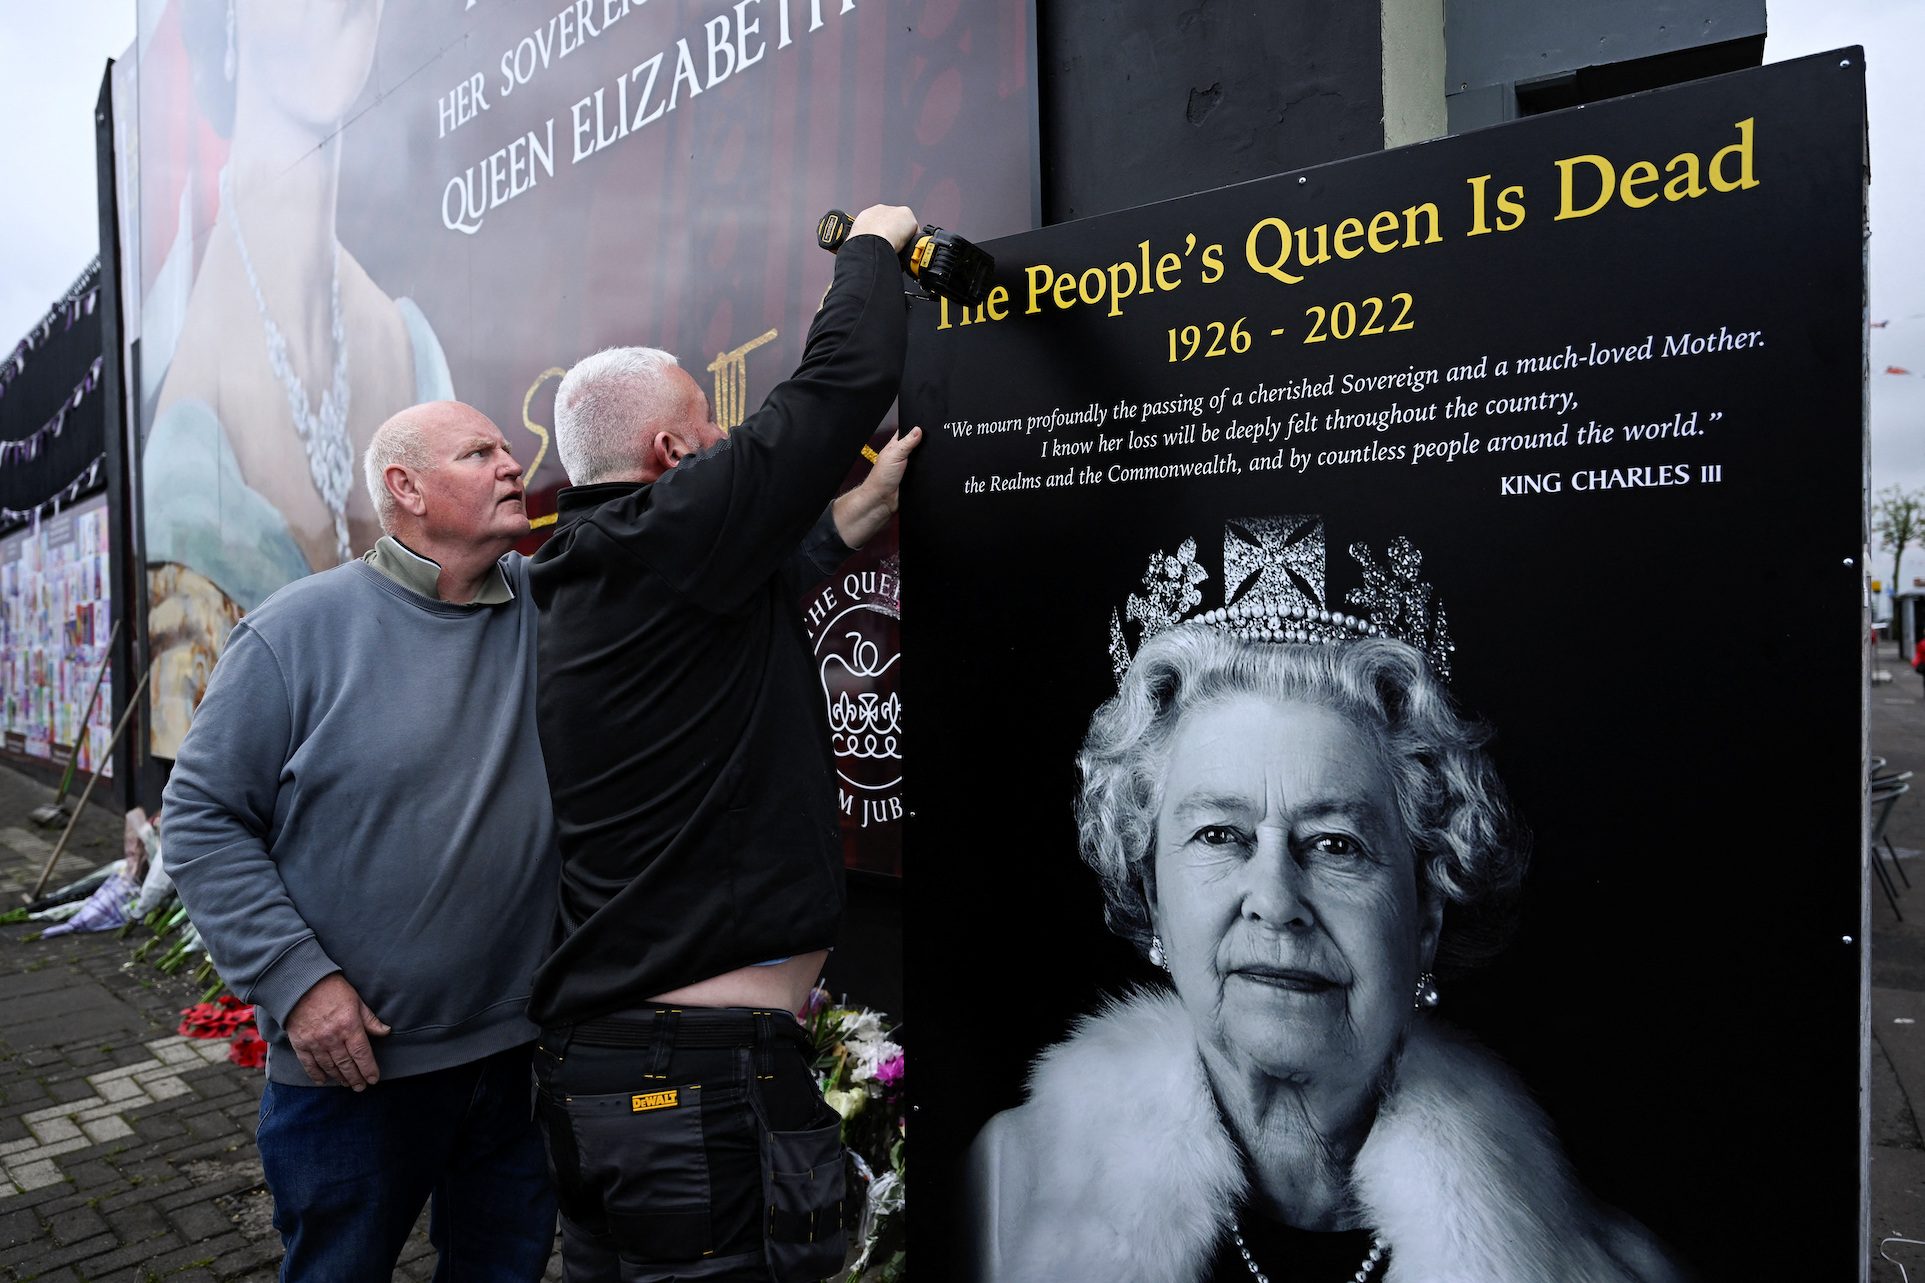 Royal mourning to last until 7 days after queen’s funeral